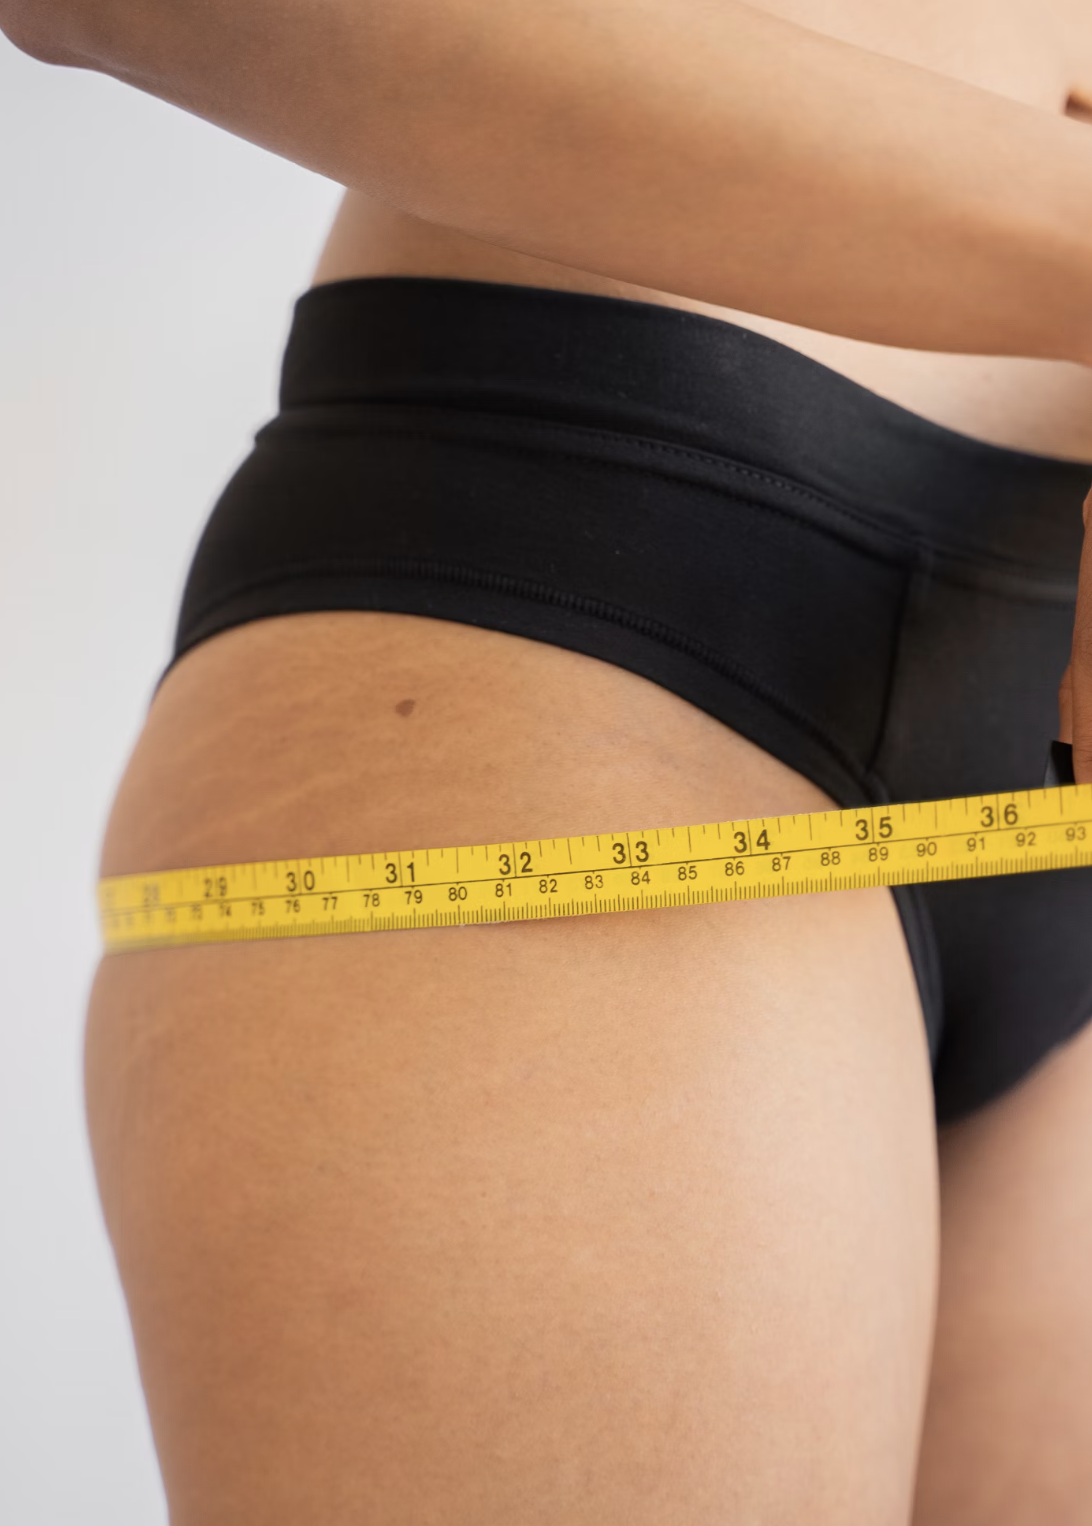 Skin Tightening After Weight Loss: Effective Strategies and Treatments